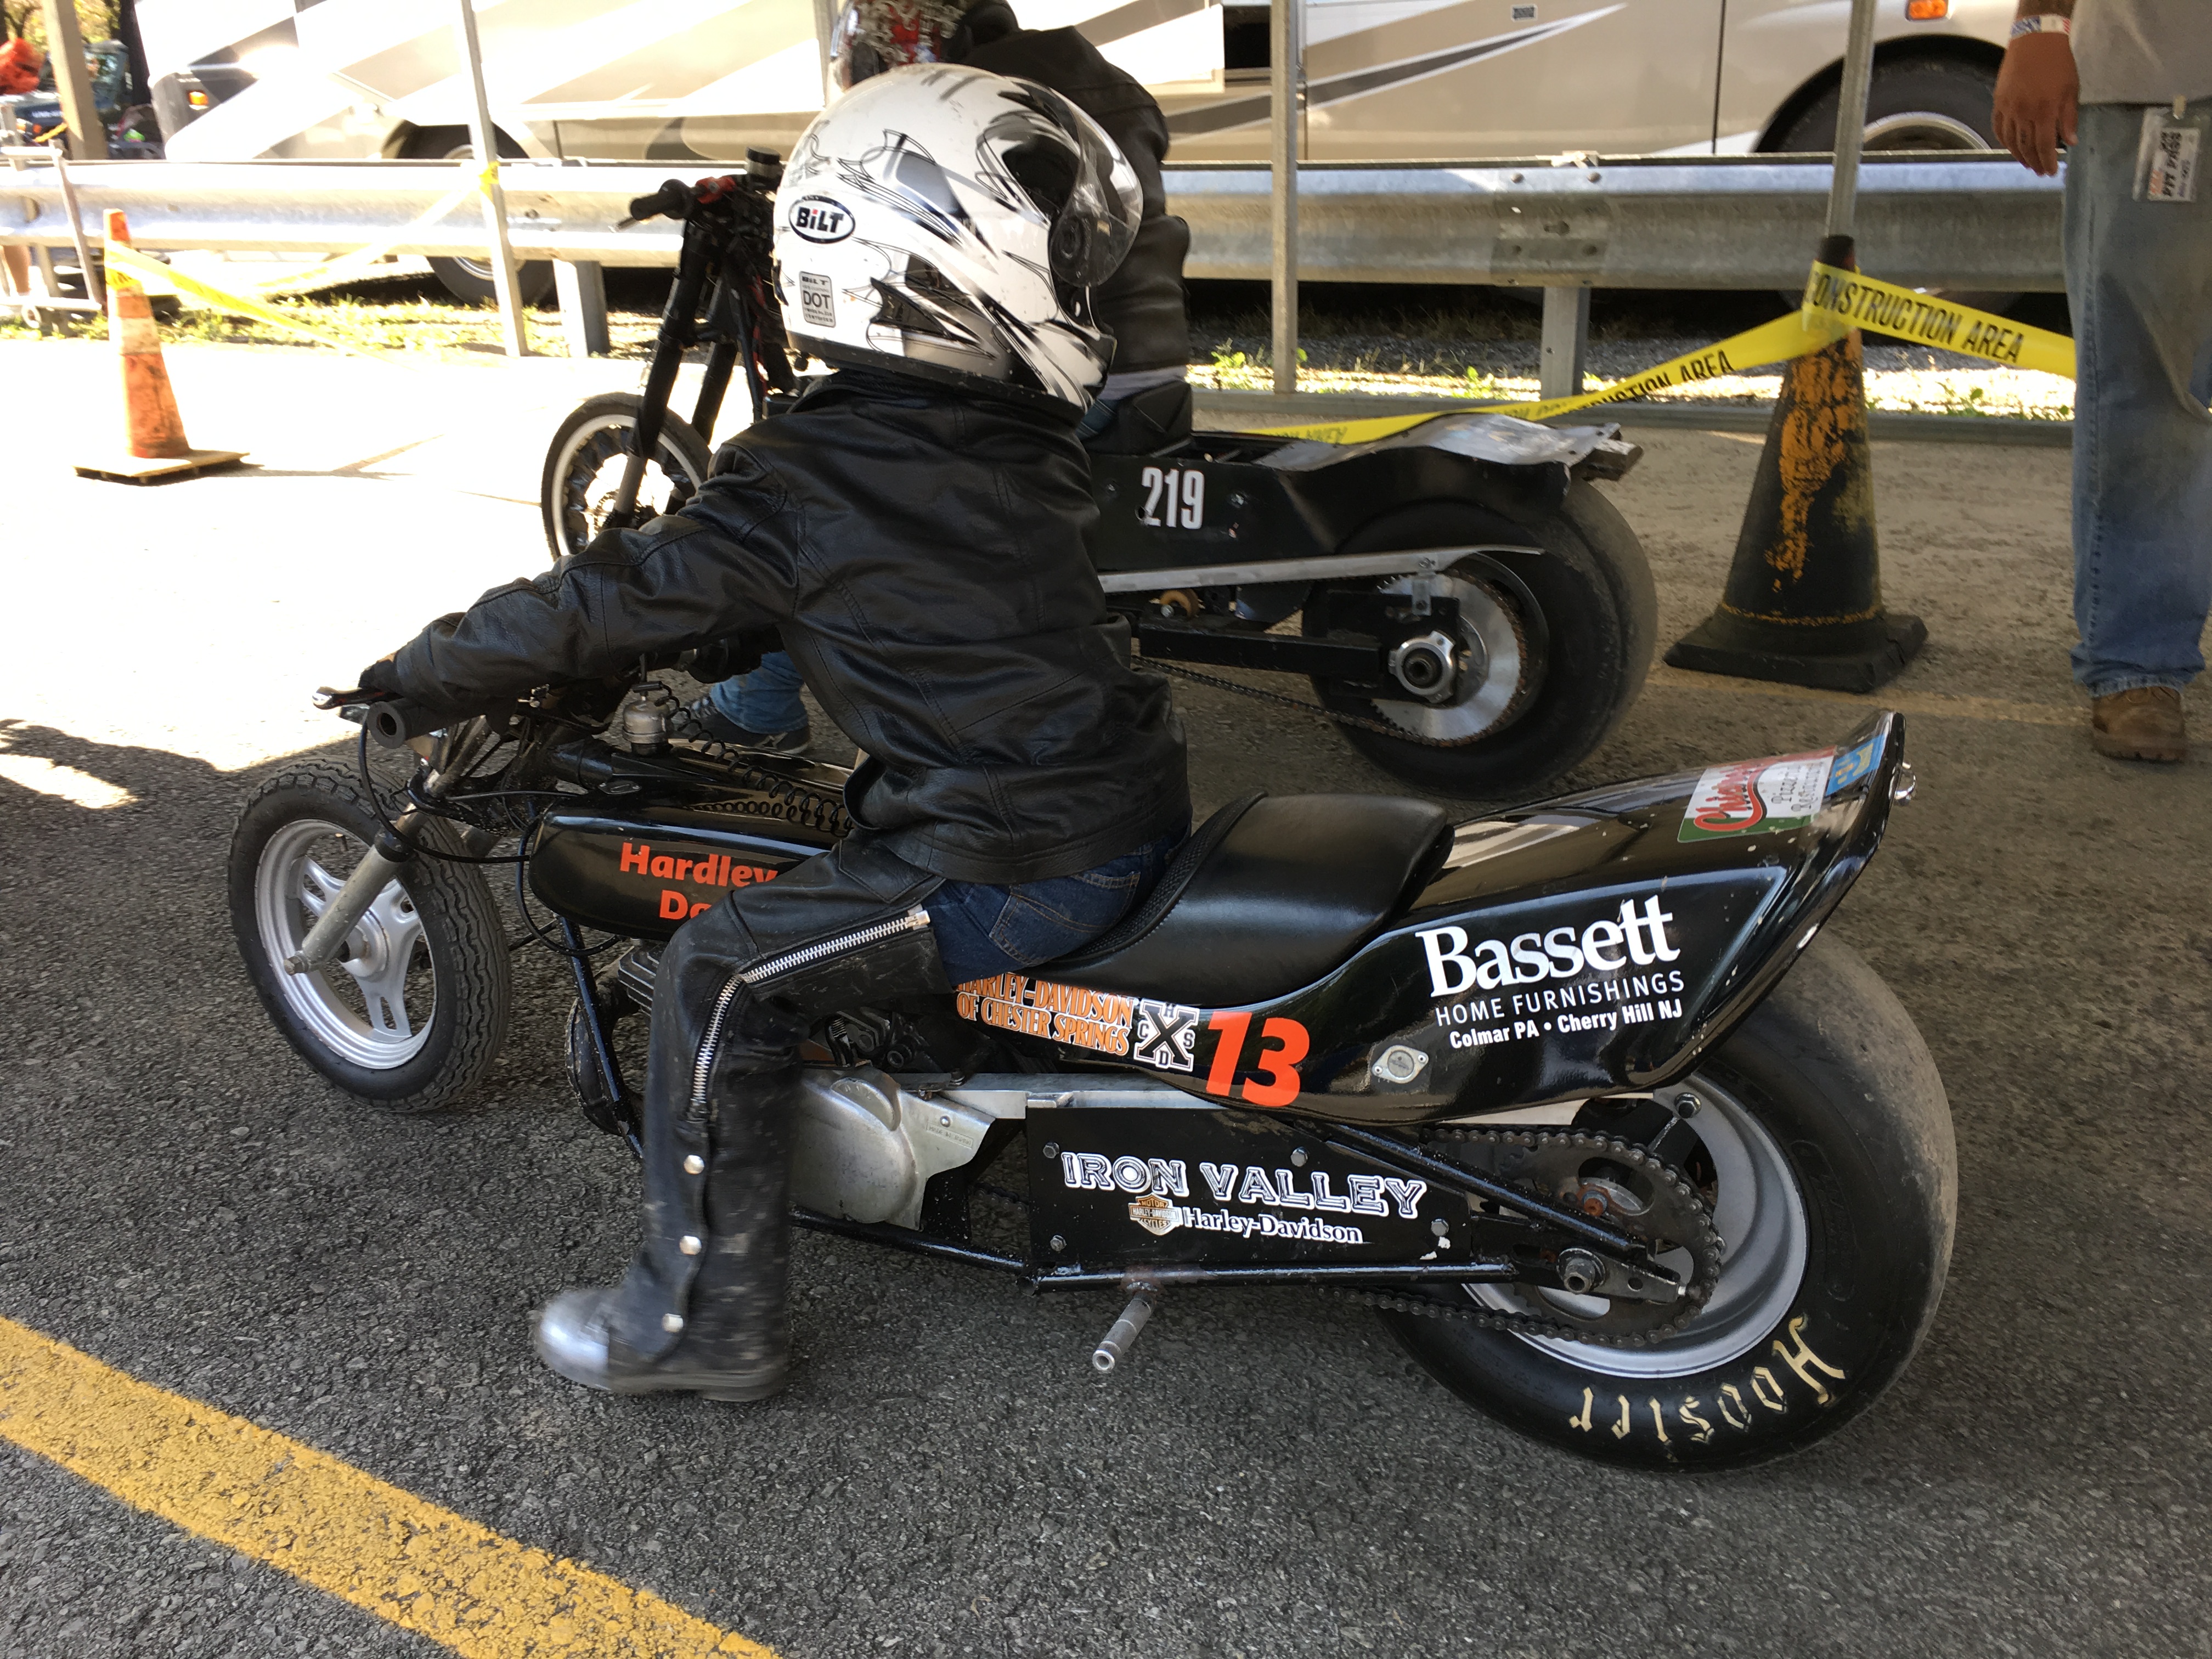 480-Foot Reading Motorcycle Club Race Coverage, Jr. Dragbikes and More – Drag Bike News